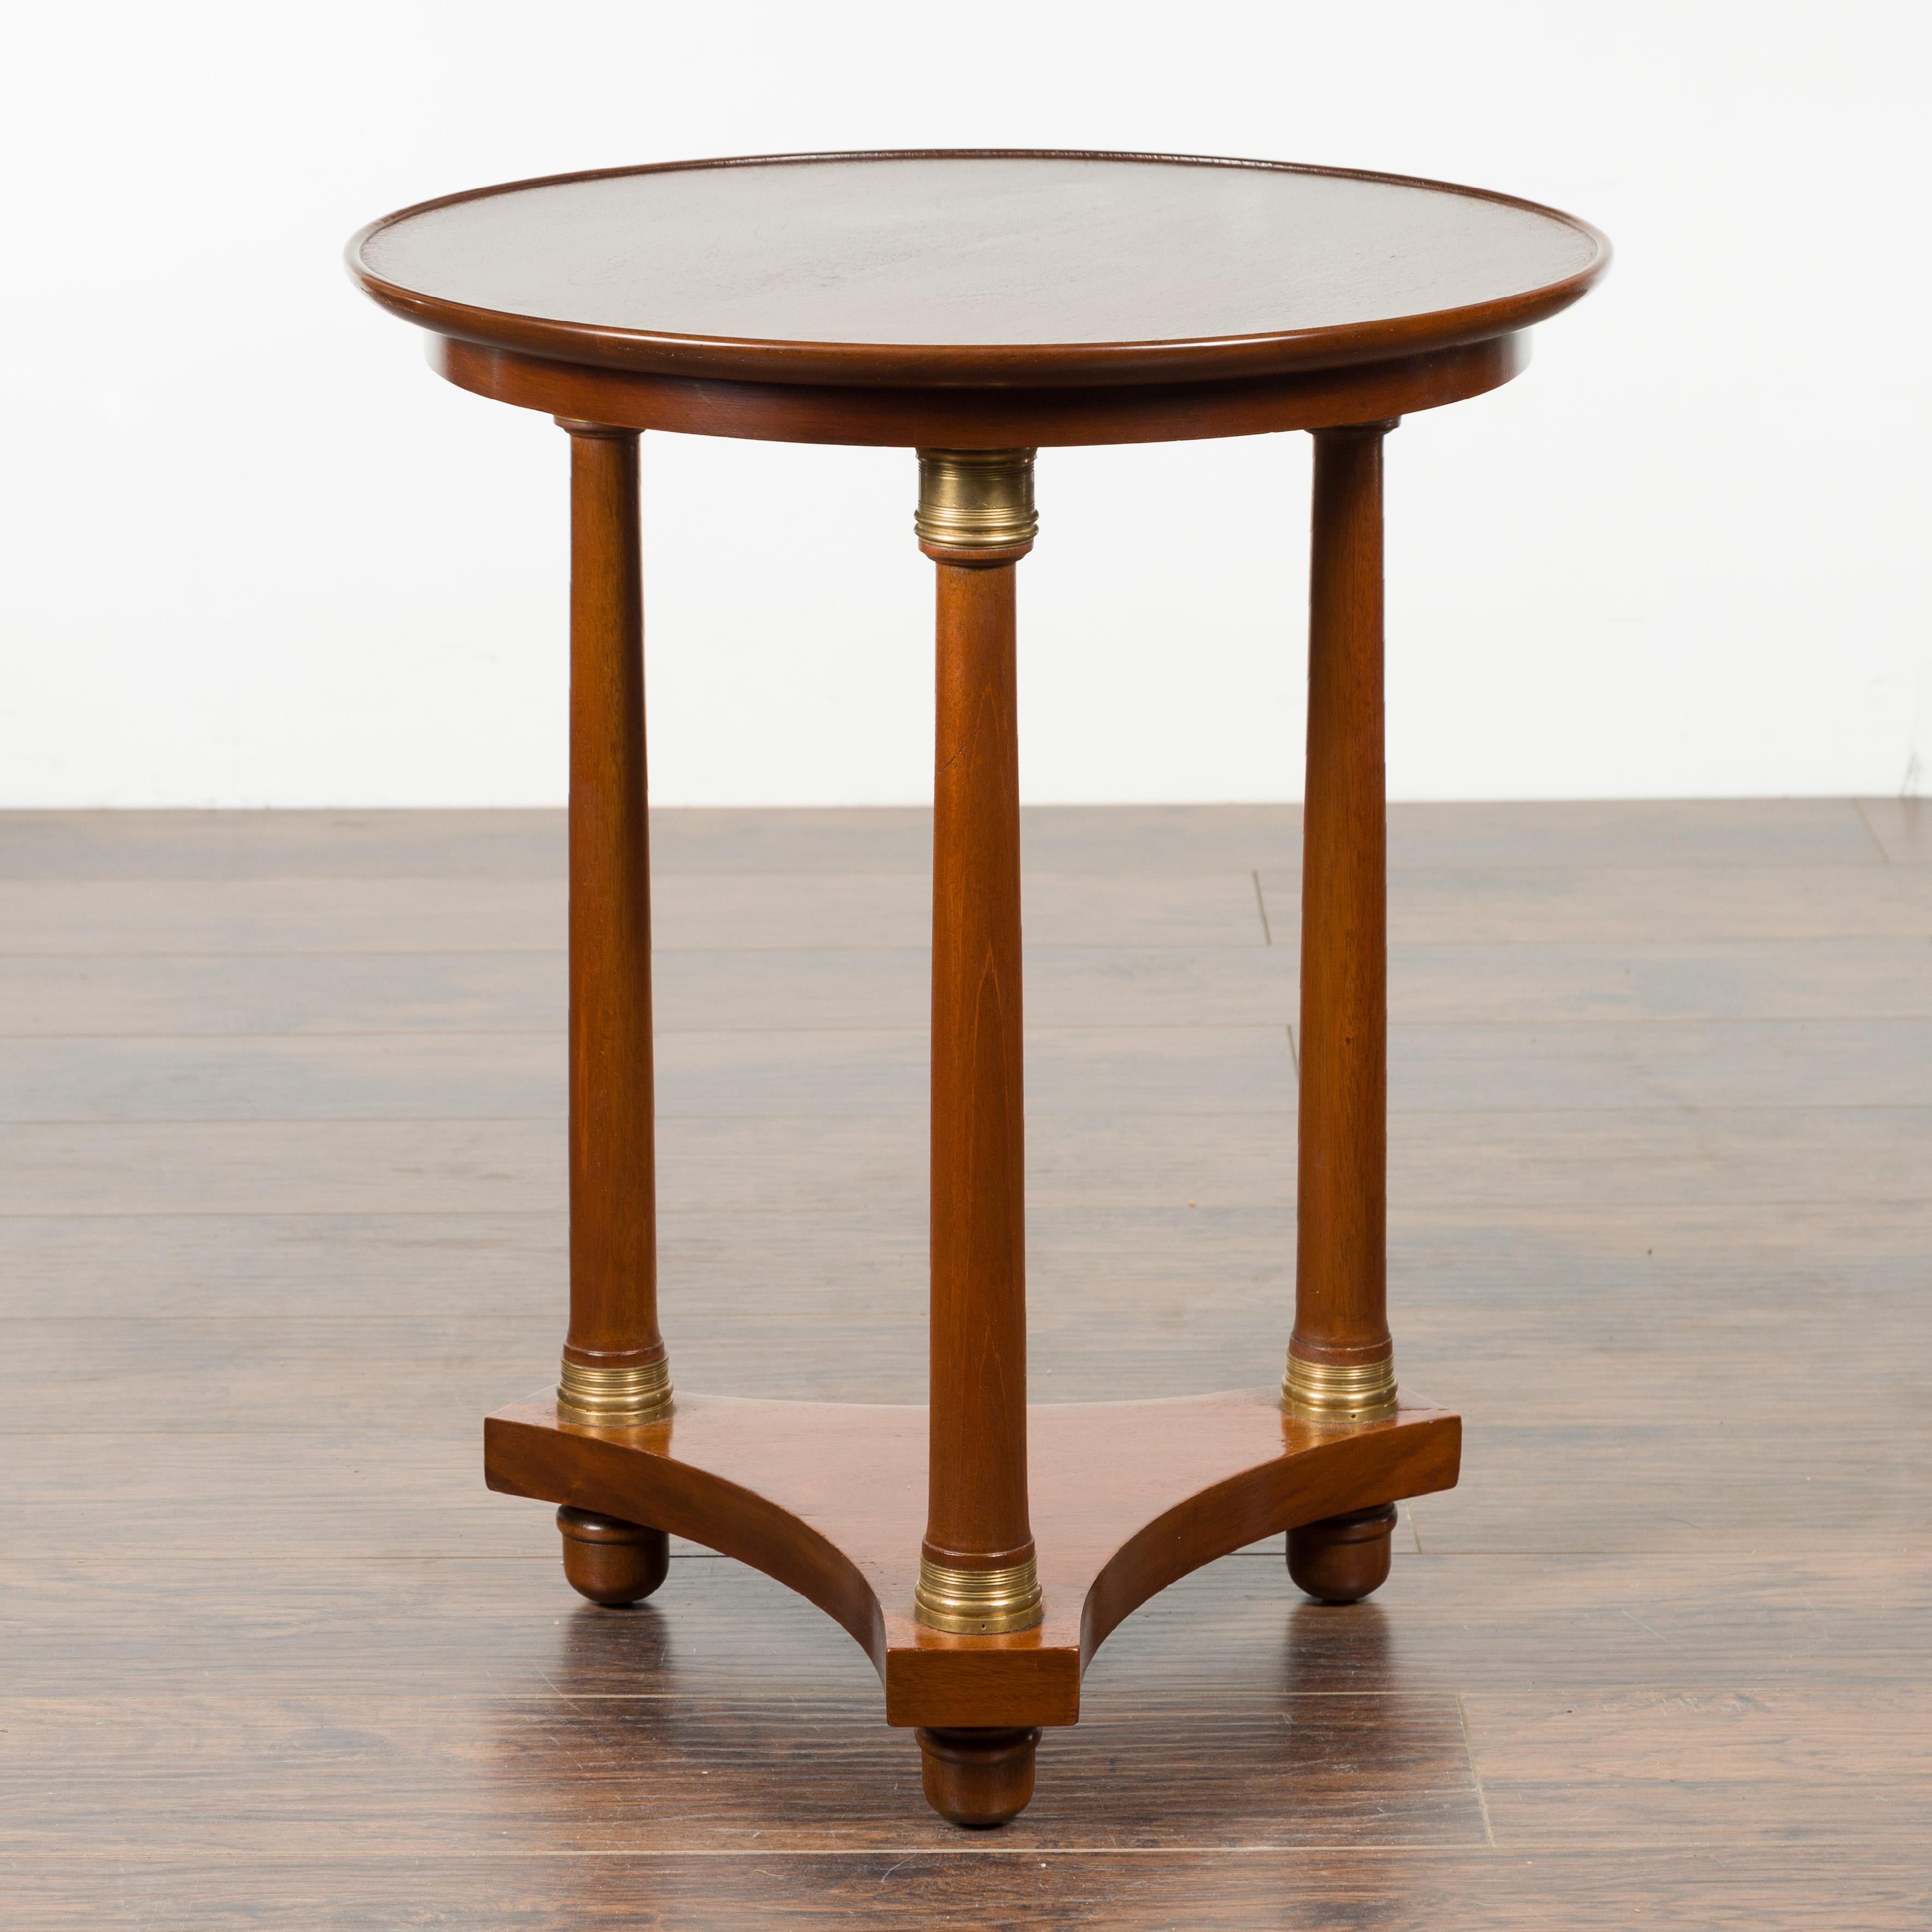 French 19th Century Empire Round Top Side Table with Bronze Mounts and Low Shelf For Sale 8